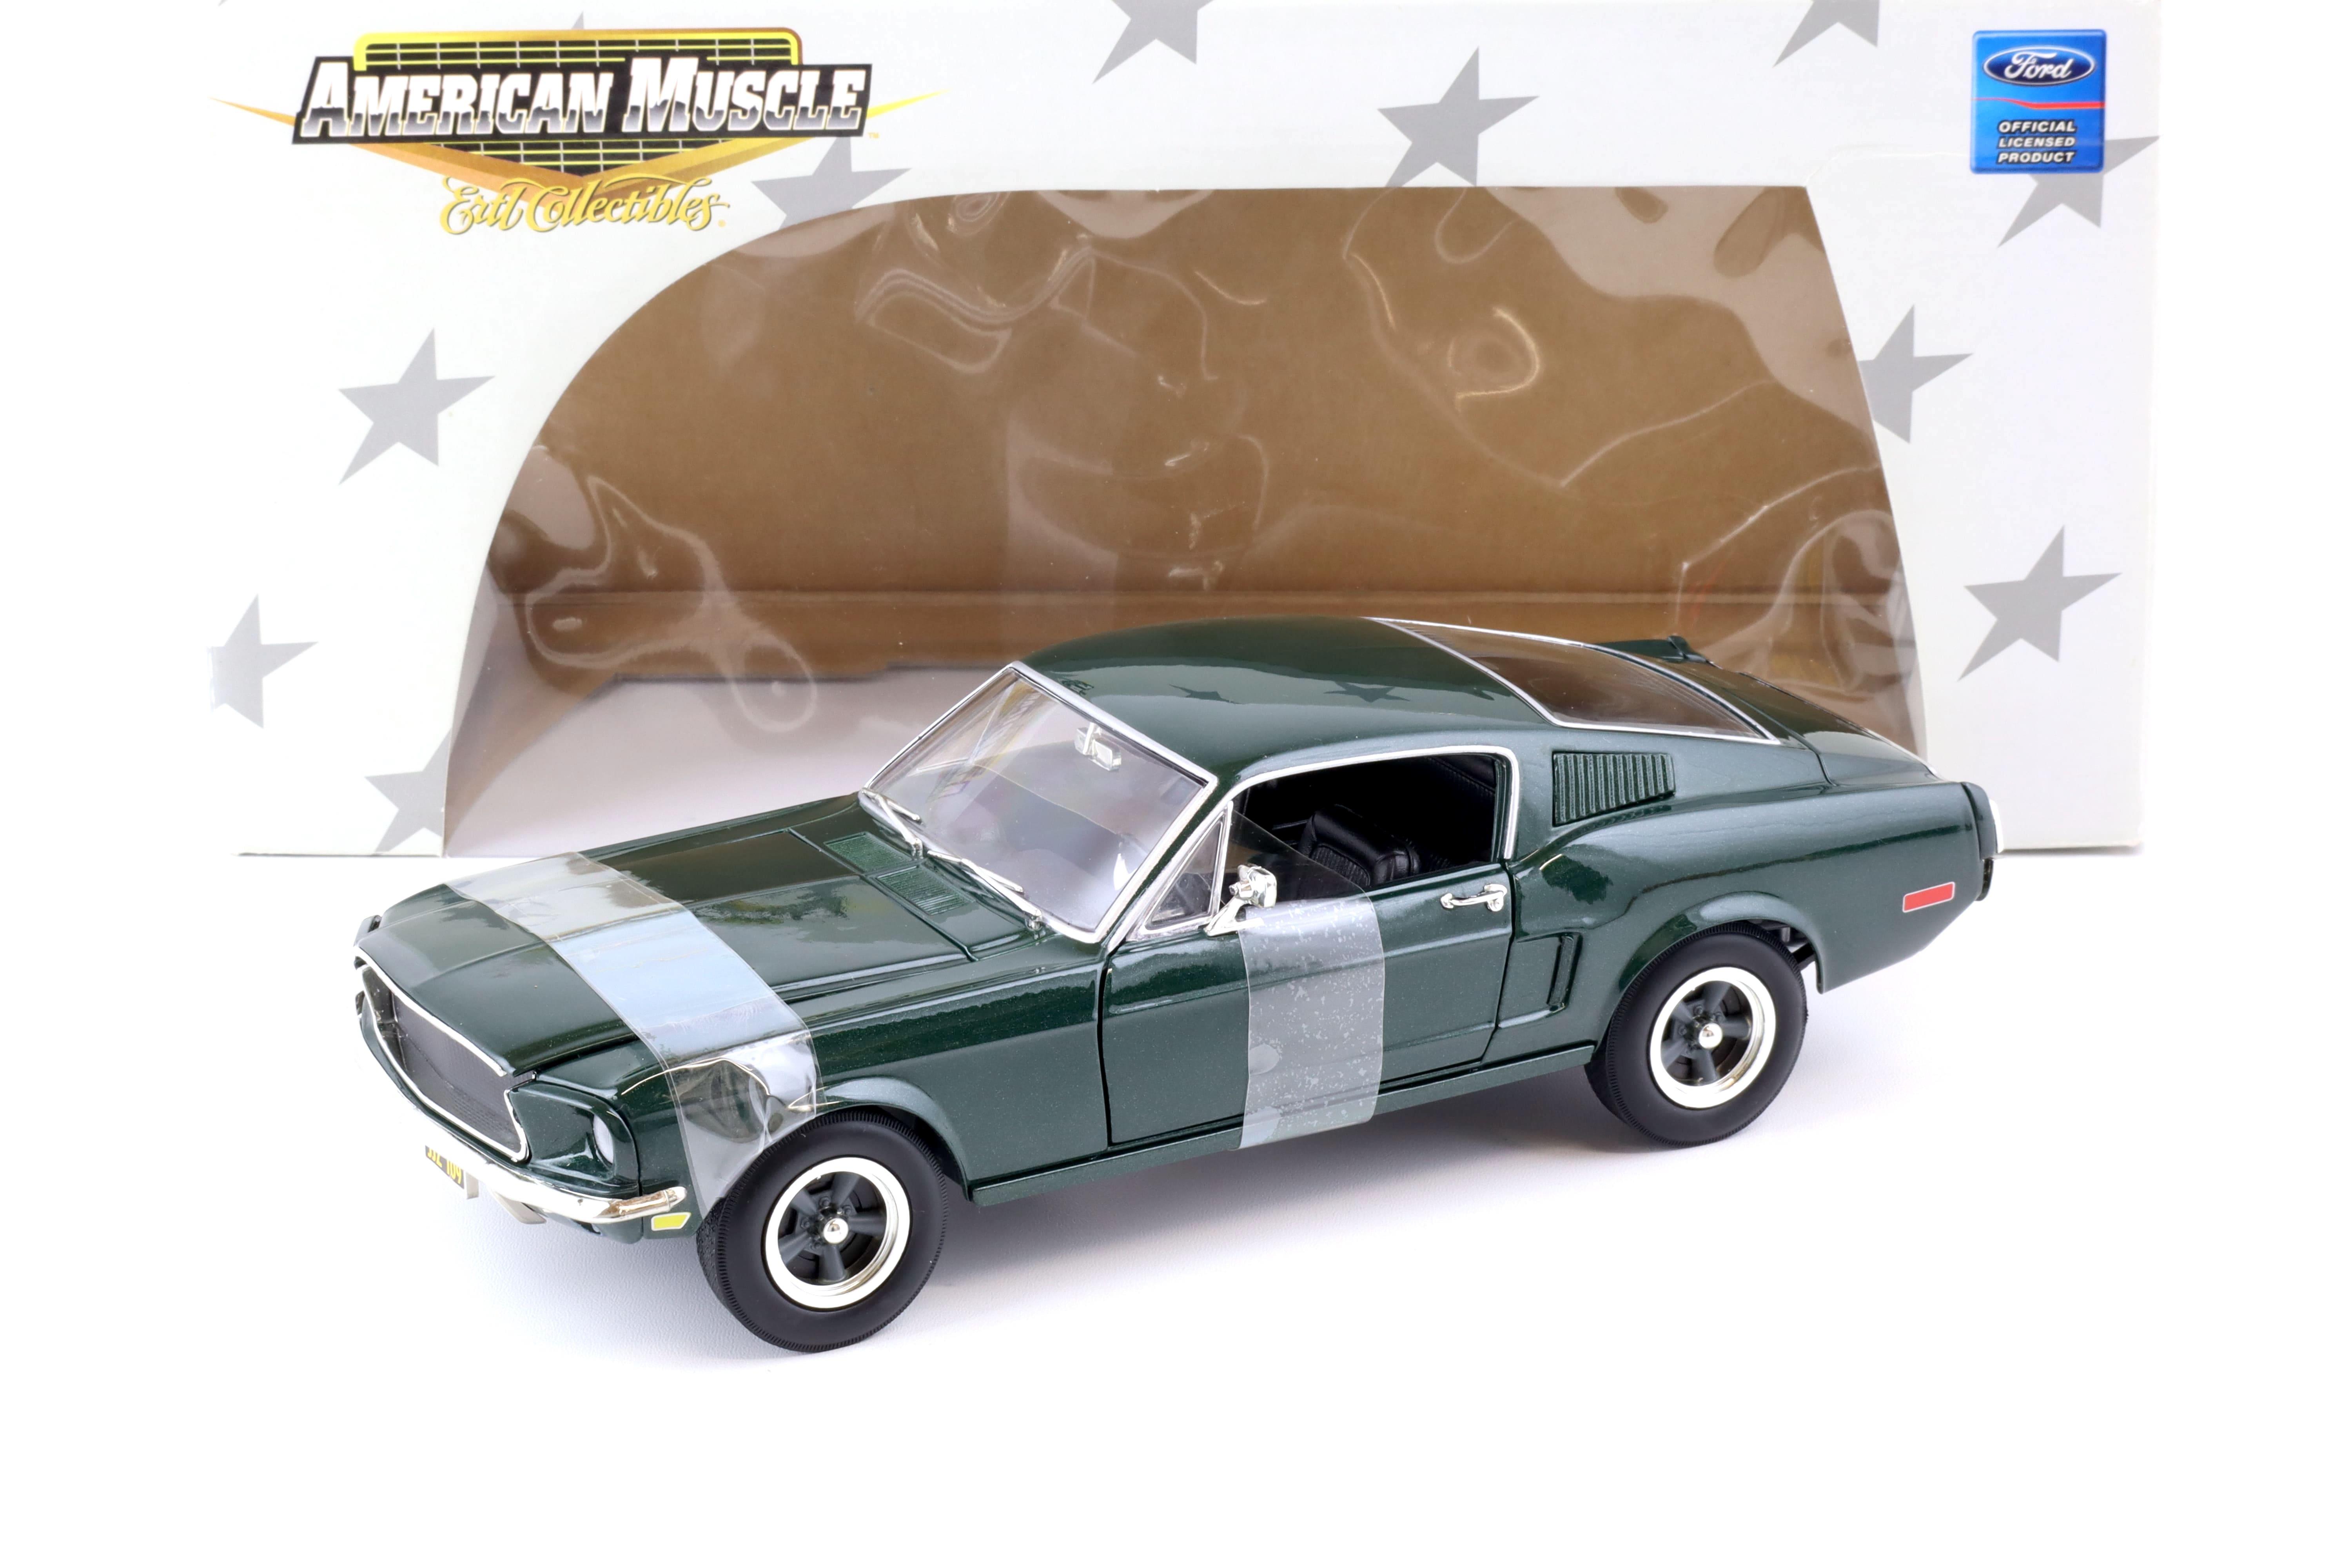 1:18 ERTL American Muscles Collectibles 1968 Ford Mustang GT dark green